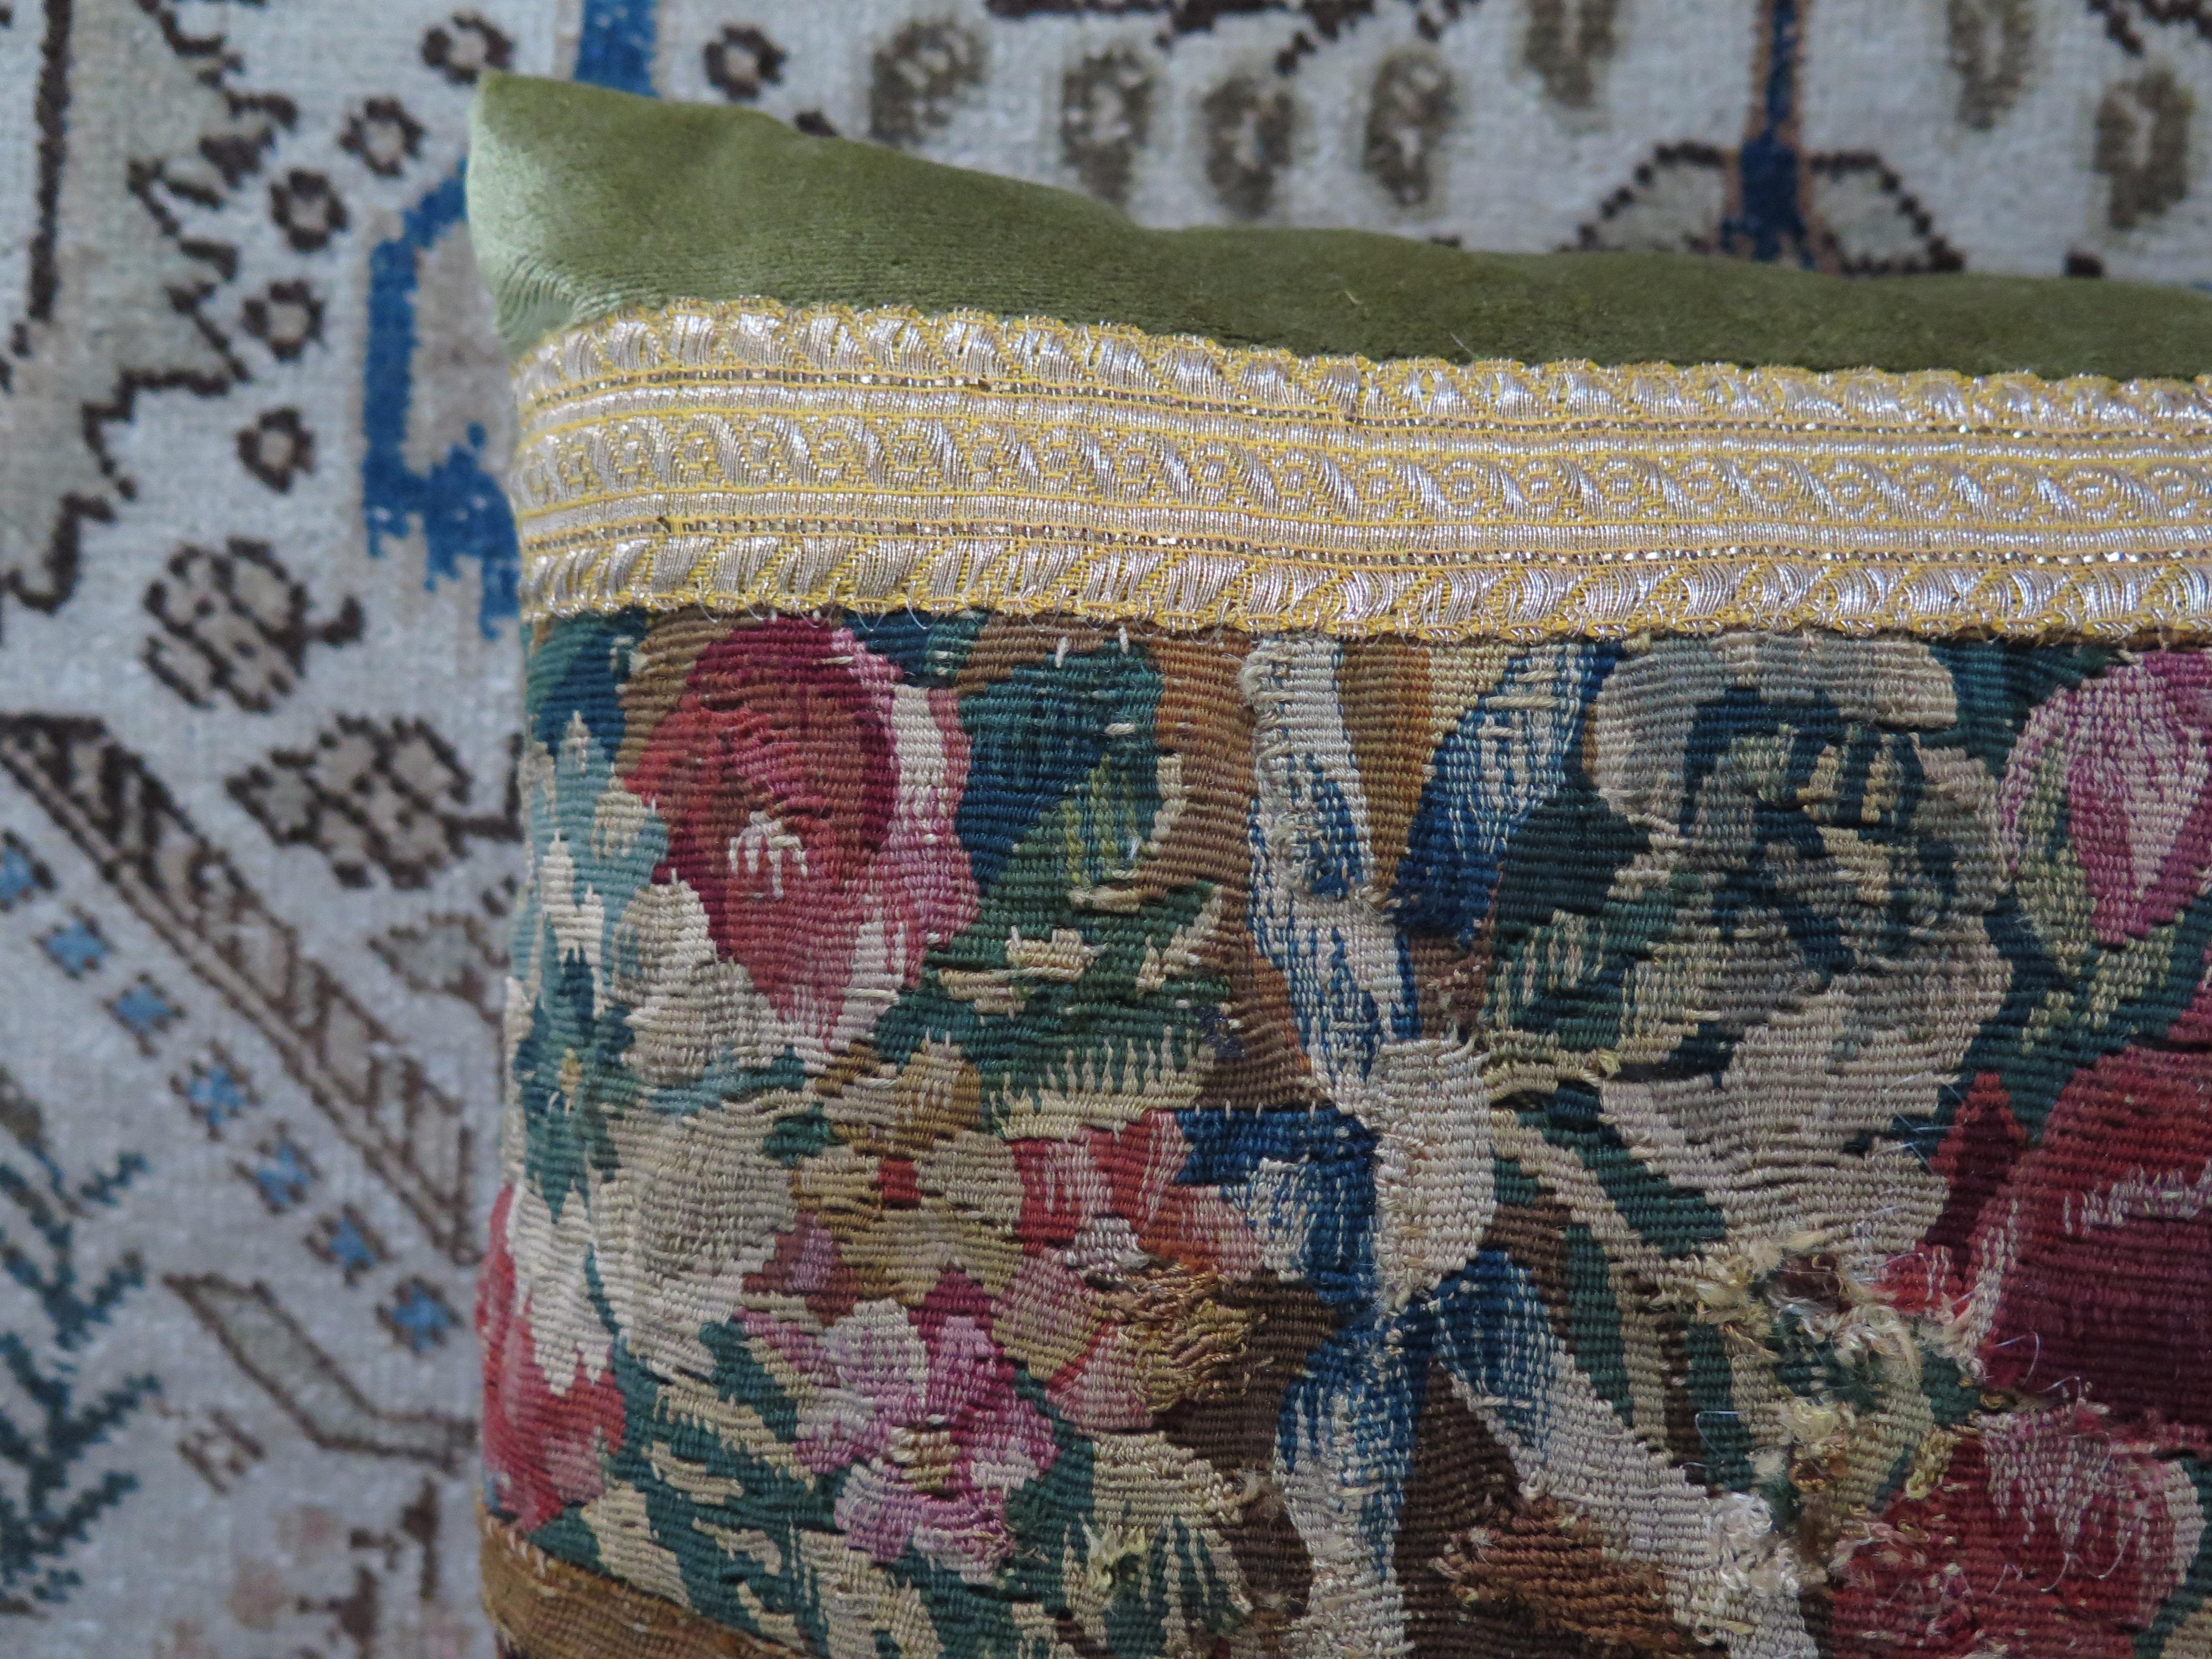 Custom 18th century floral tapestry pillow in beautiful Schumacher silk velvet and antique gold metallic trim. Down filled.